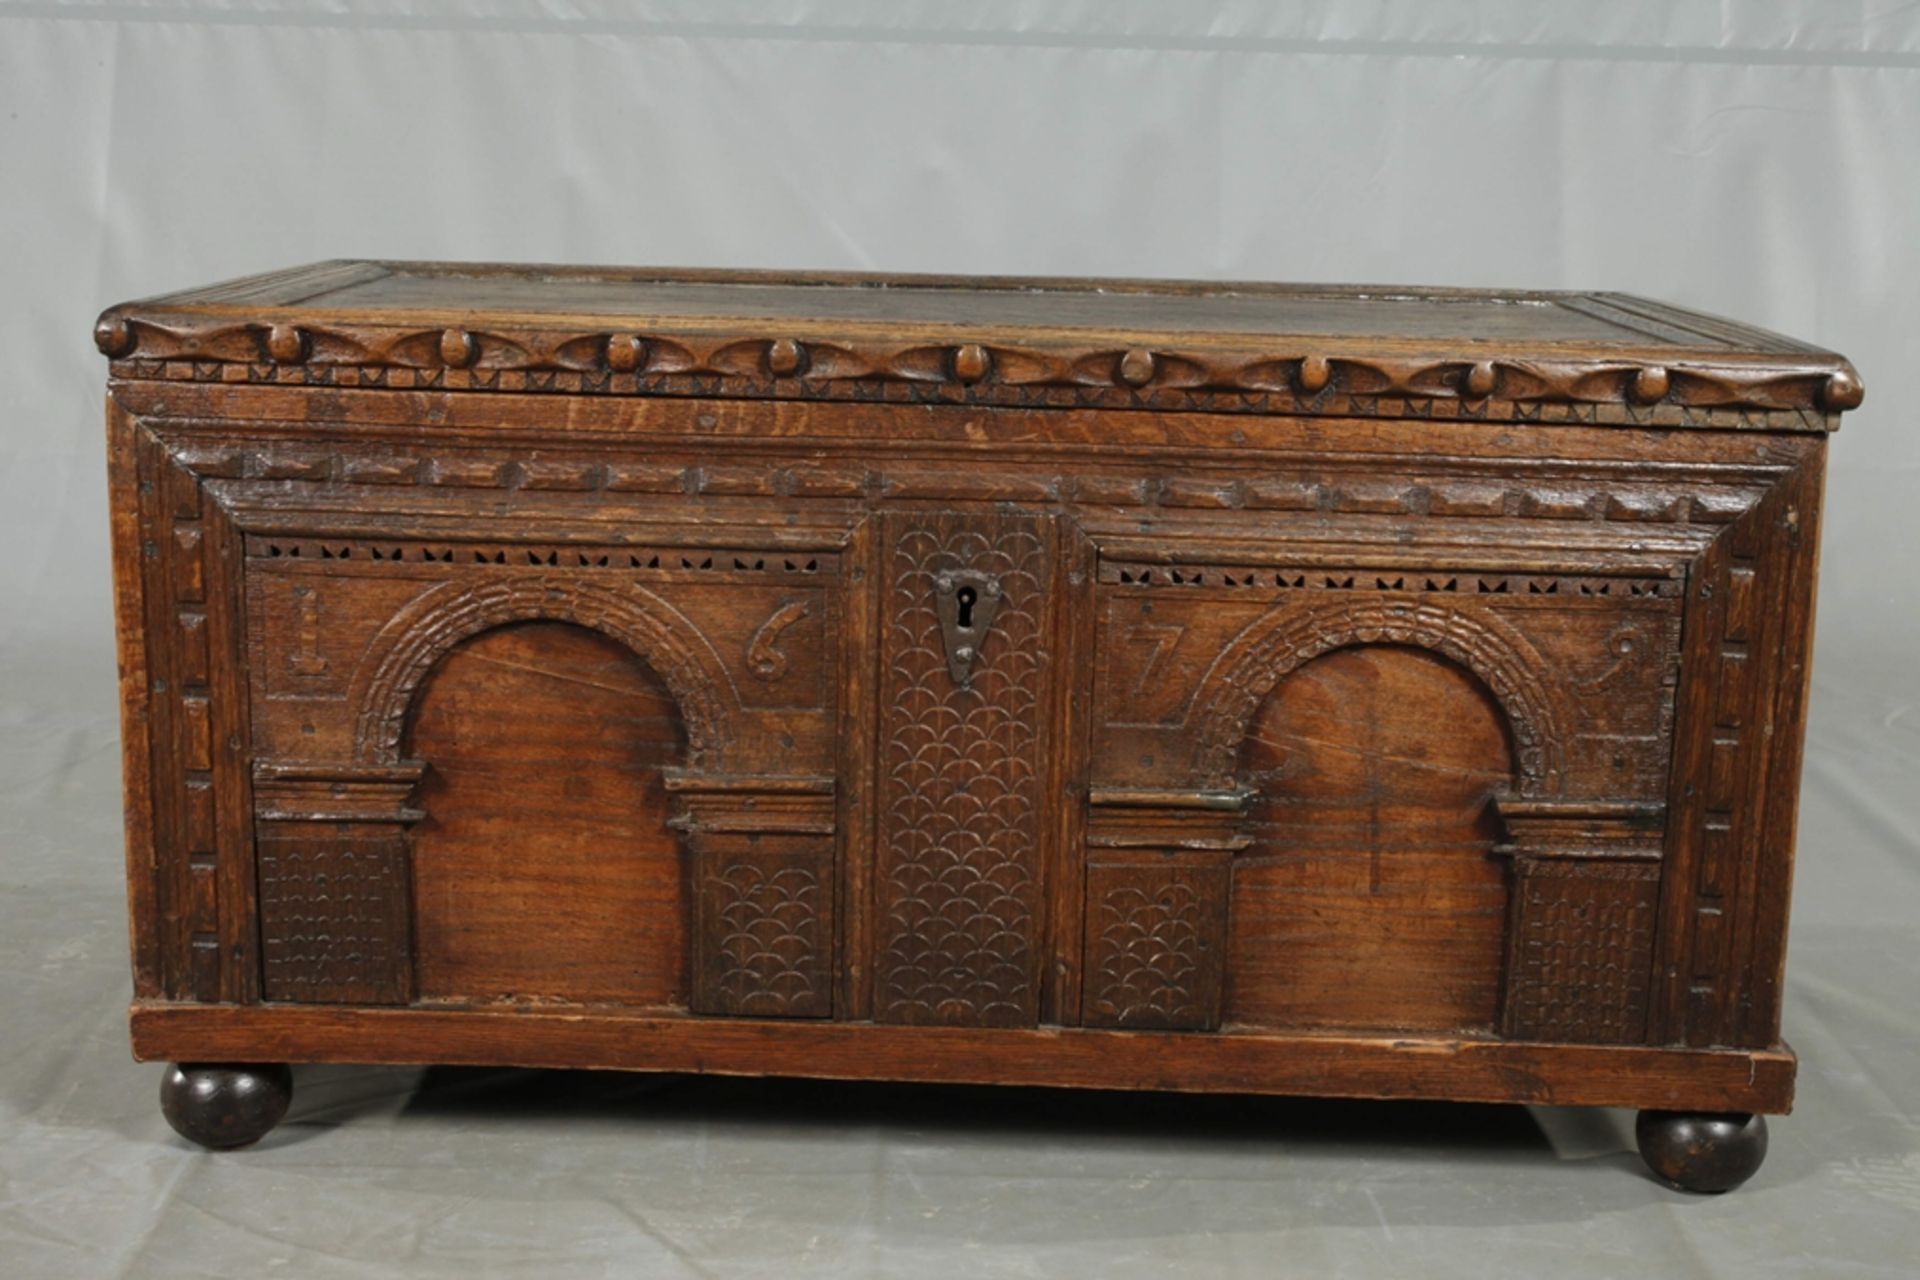 Small flat-lidded chest, late Renaissance - Image 2 of 6